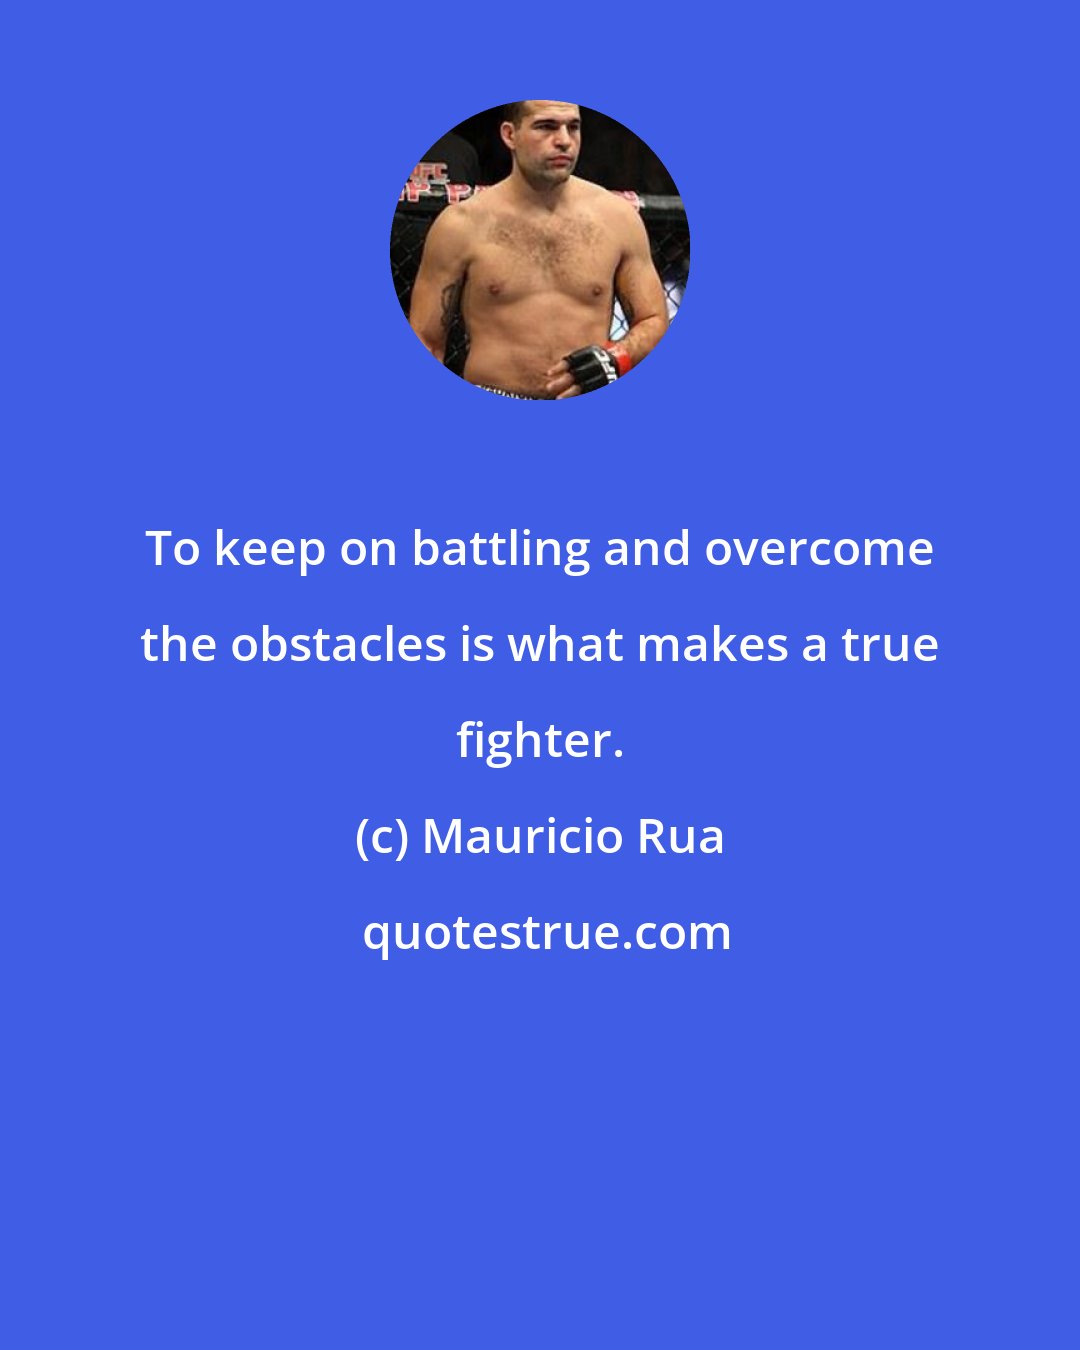 Mauricio Rua: To keep on battling and overcome the obstacles is what makes a true fighter.